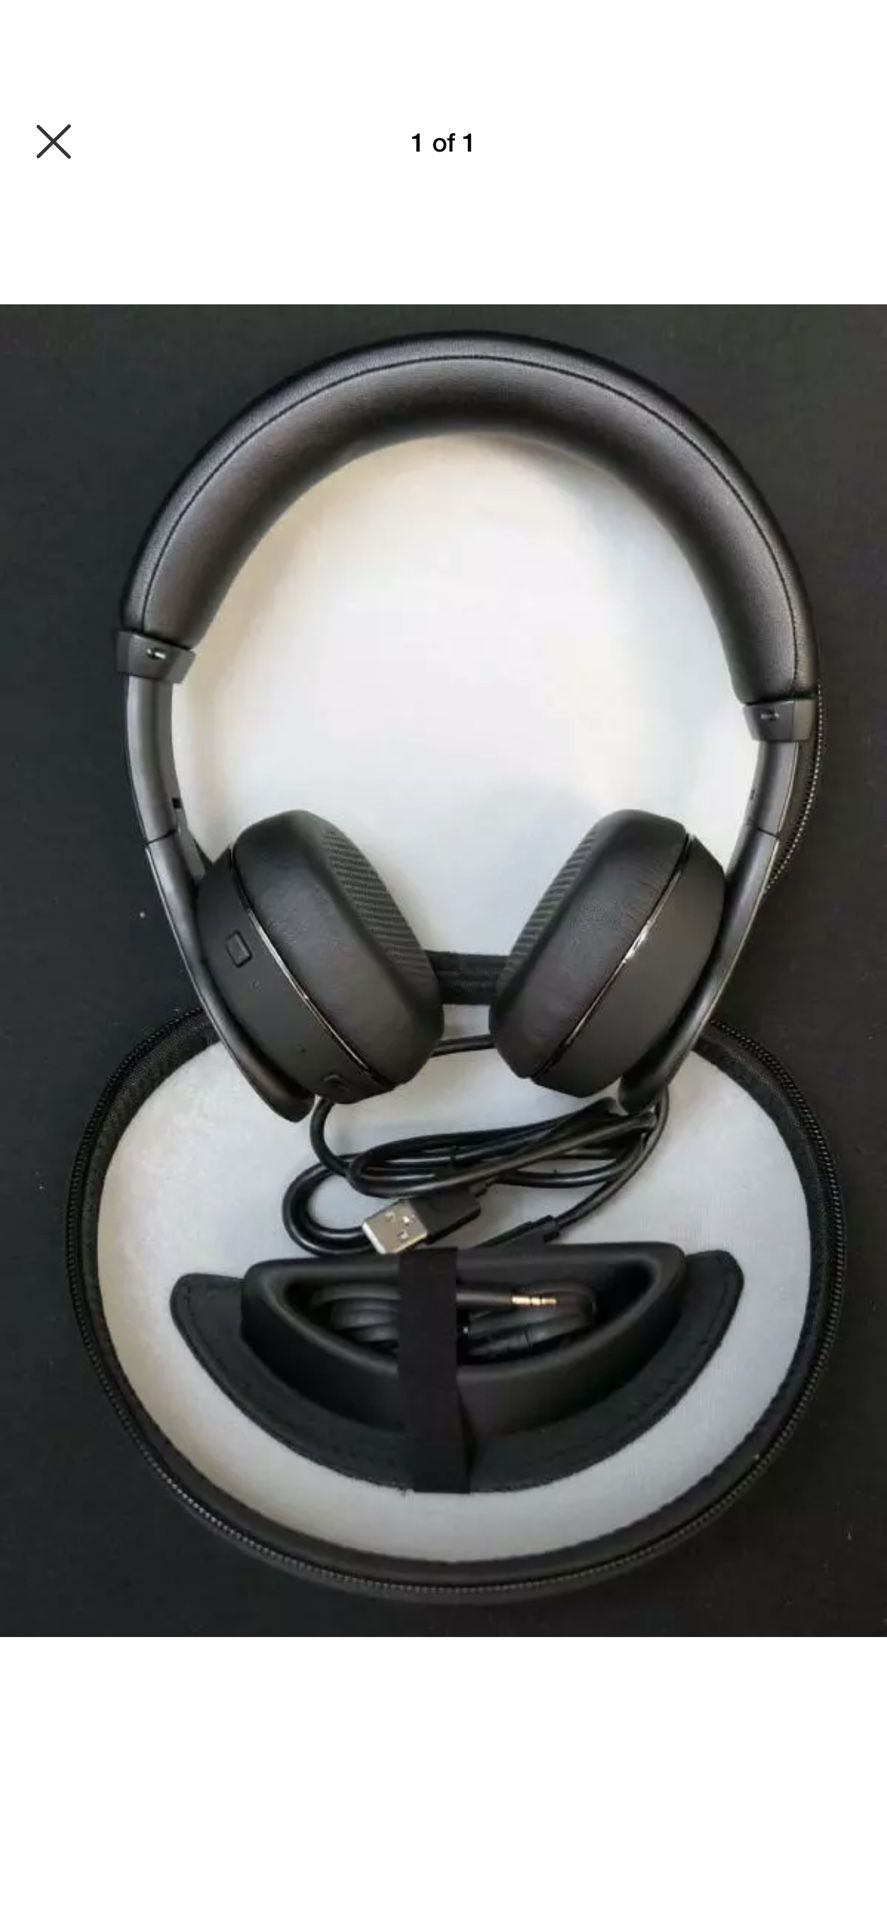 $110, now $100, Klipsch reference on ear, Bluetooth wireless headphones with USB charging cord and 3.5 mm Jack for computer phone or stereo